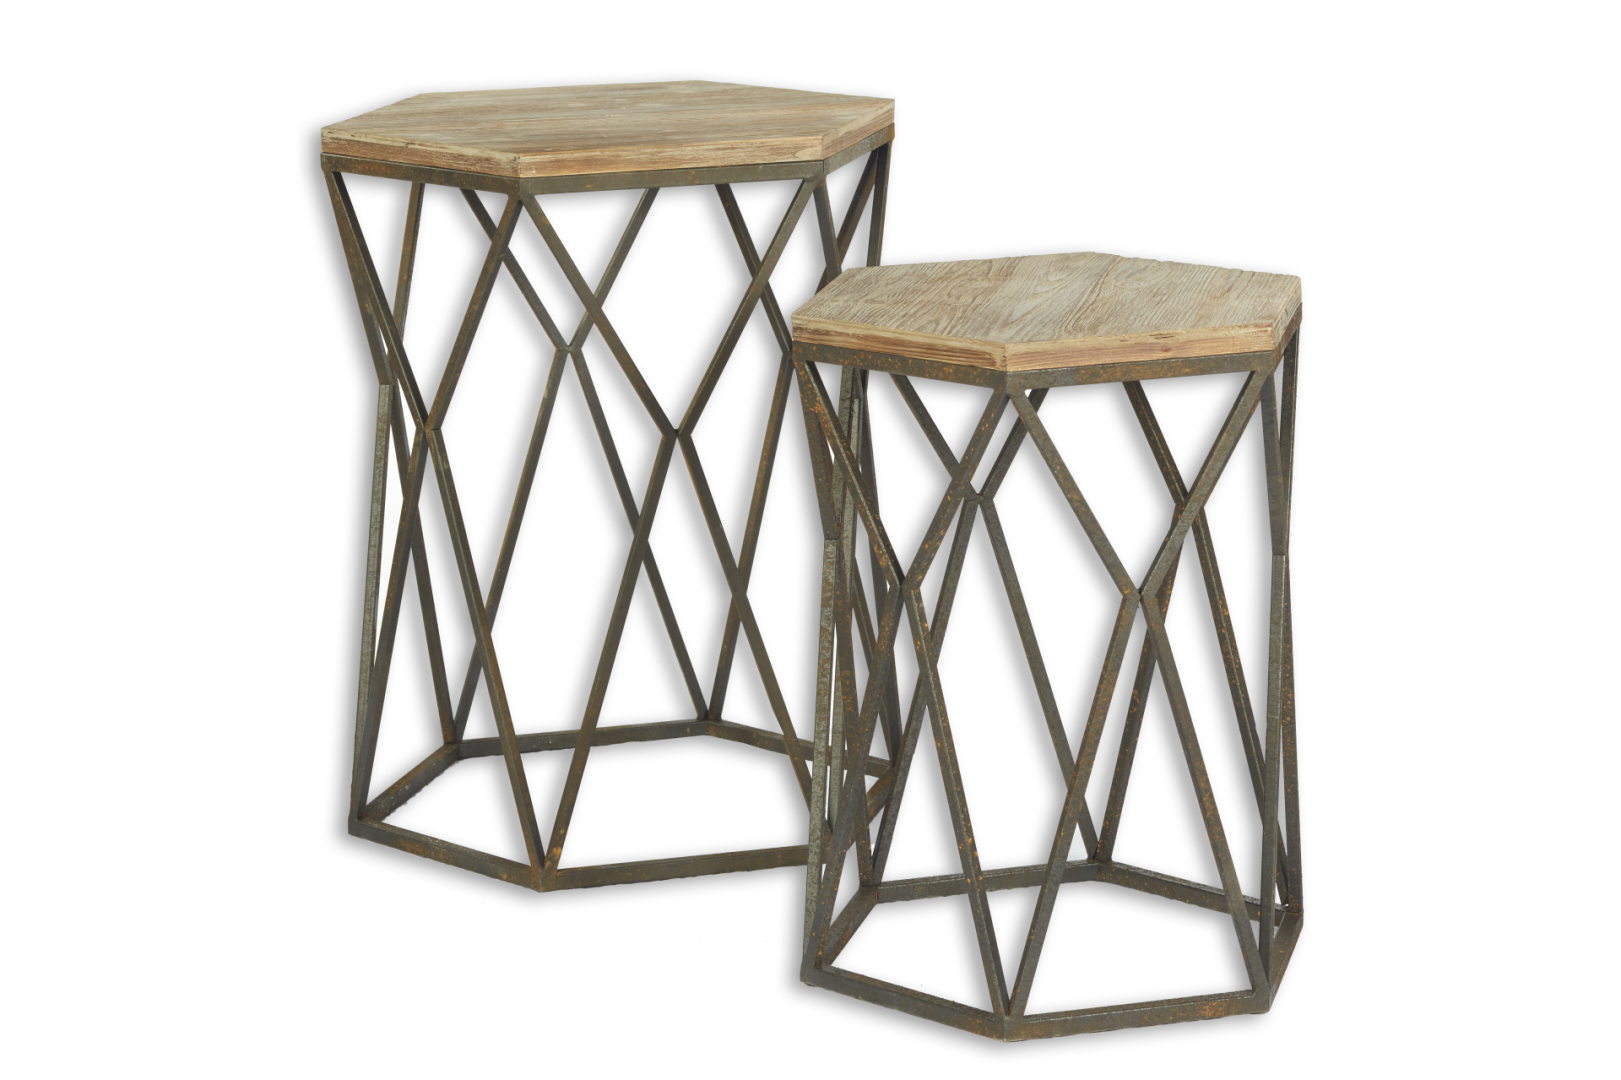 pair wood and metal accent tables perch decor table wooden tray outdoor furniture covers round light bulbs whole lamp shades rustic white end sears acrylic plastic garden chairs